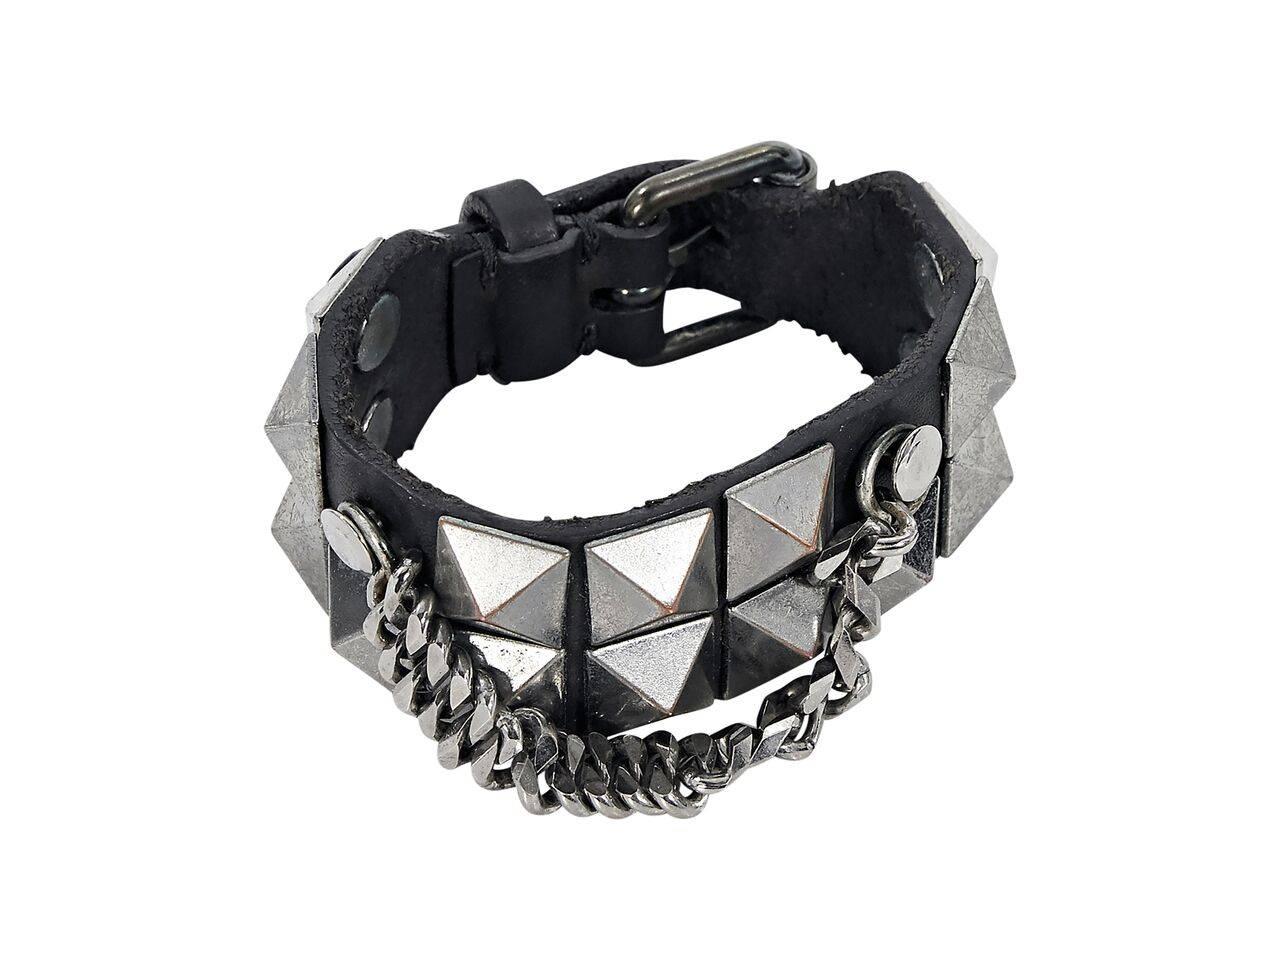 Product details:  Black leather cuff bracelet with pyramid studs by Burberry.  Adjustable buckle closure.  Hanging chain detail.  Gunmetal-tone hardware.  10.75